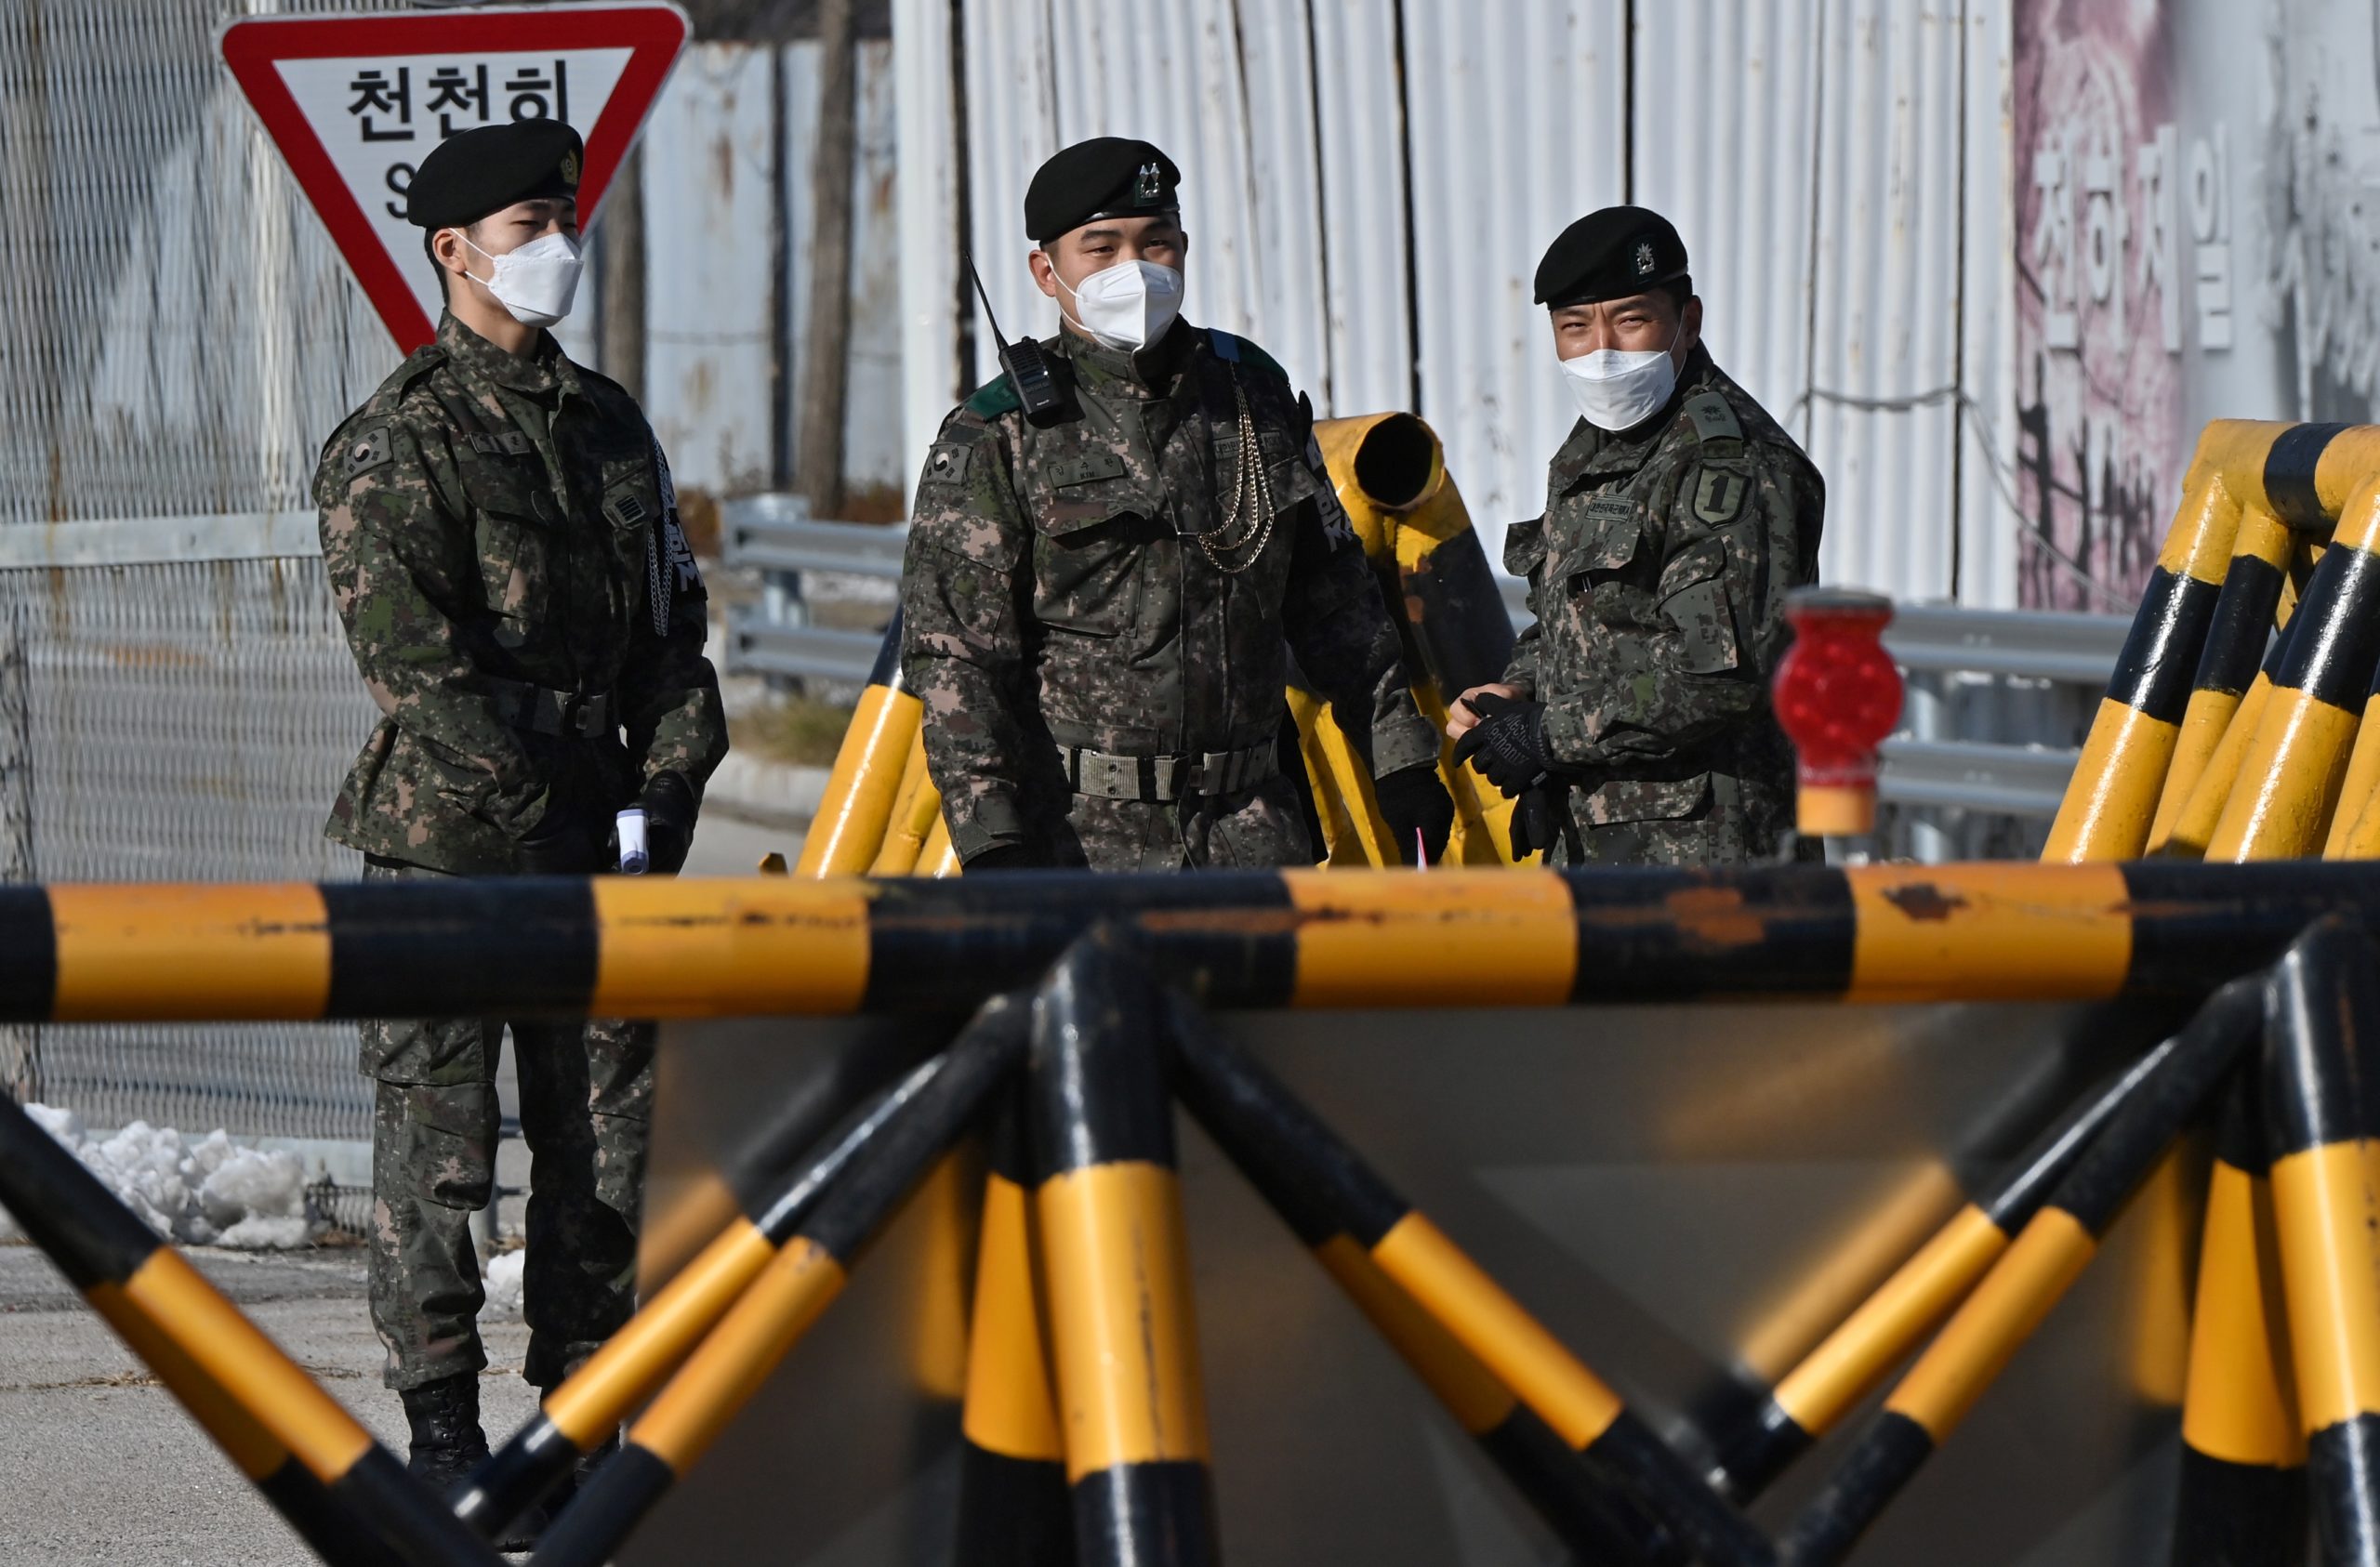 South Korean soldiers stand at a checkpoint on the Tongil bridge, the road leading to North Korea's Kaesong joint industrial complex, near the Demilitarized Zone (DMZ) dividing the two Koreas in Paju on December 15, 2020, a day after South Korea's parliament passed a law criminalising sending anti-Pyongyang leaflets into the North. (Photo by Jung Yeon-je / AFP) (Photo by JUNG YEON-JE/AFP via Getty Images)